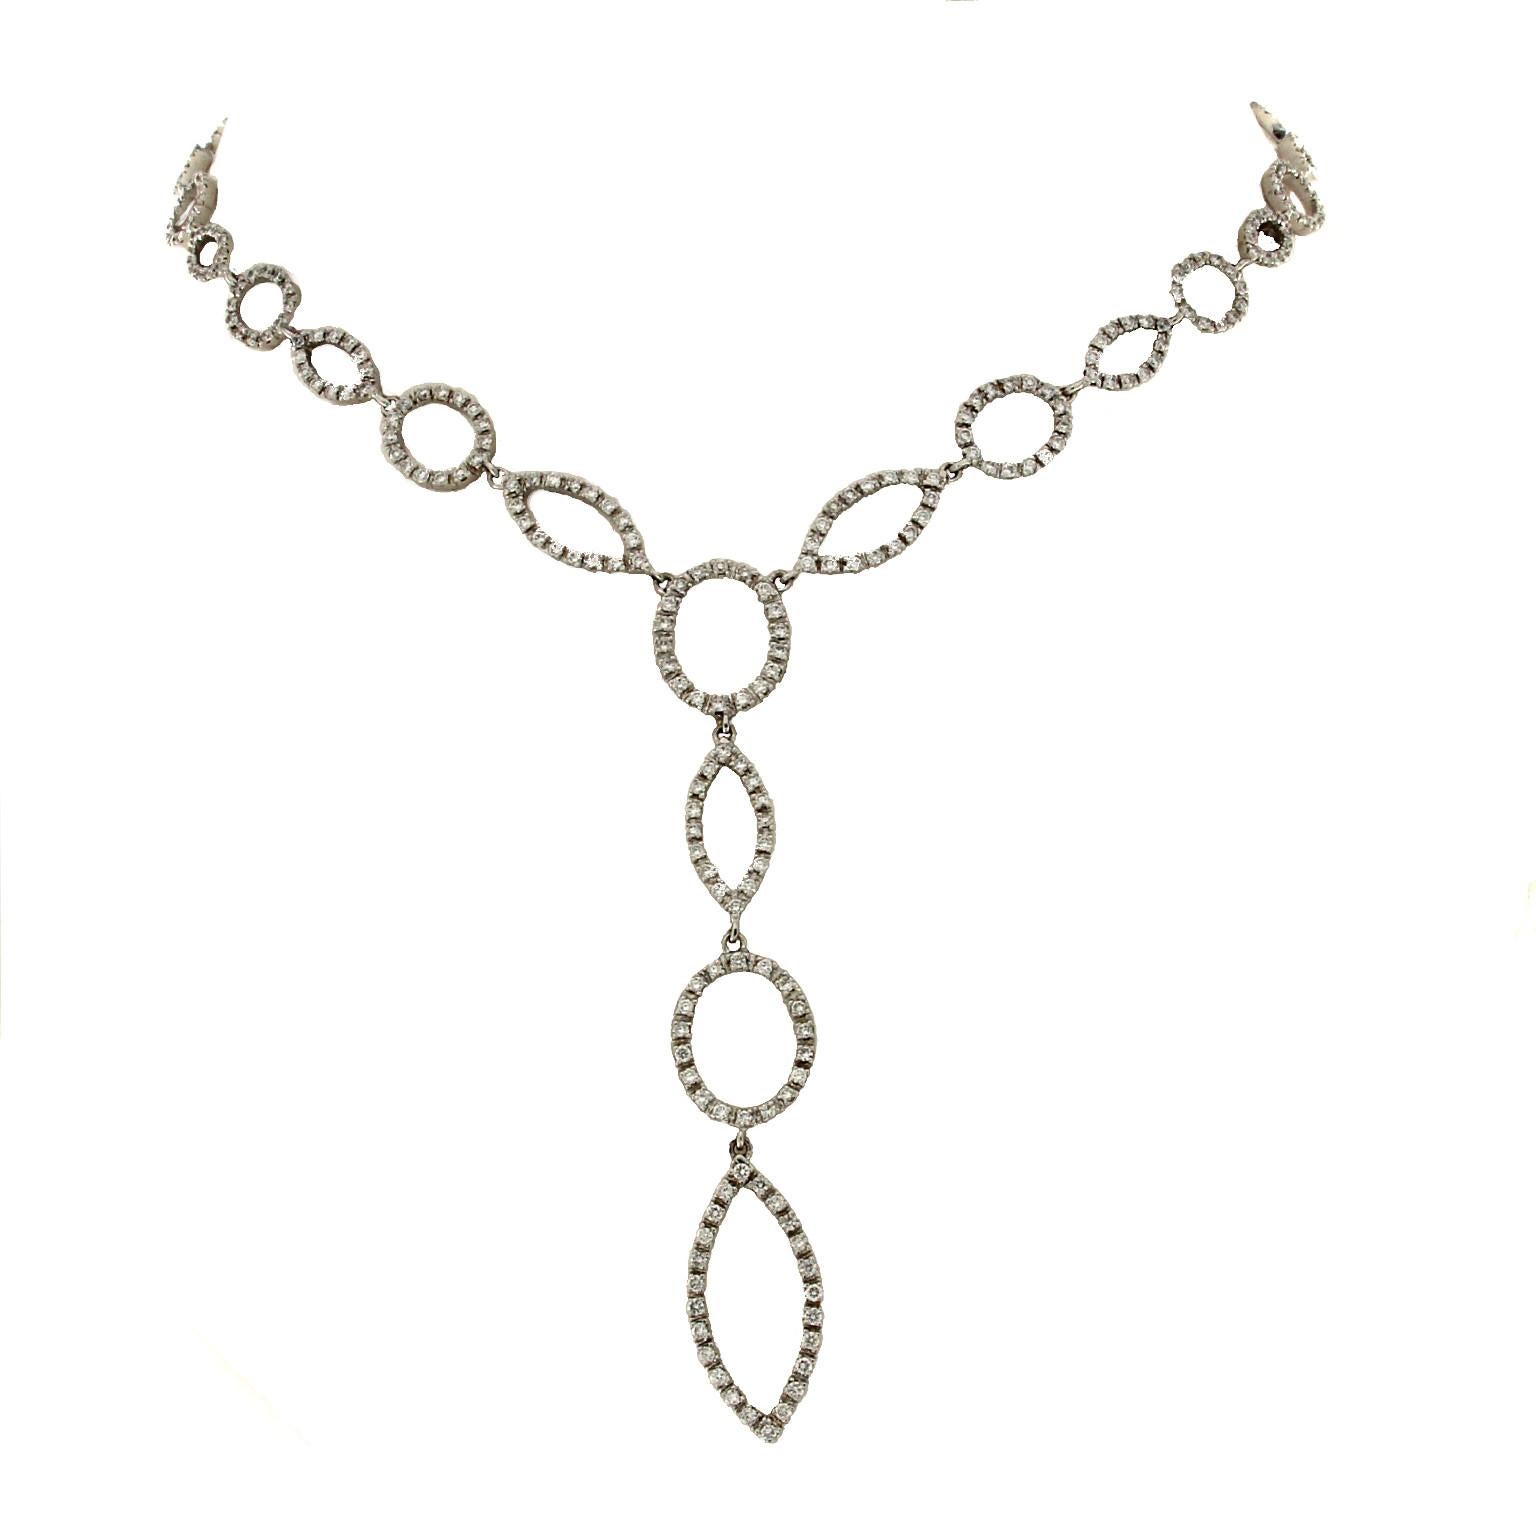 White Diamond and White Gold Necklace, Collection Pingpong